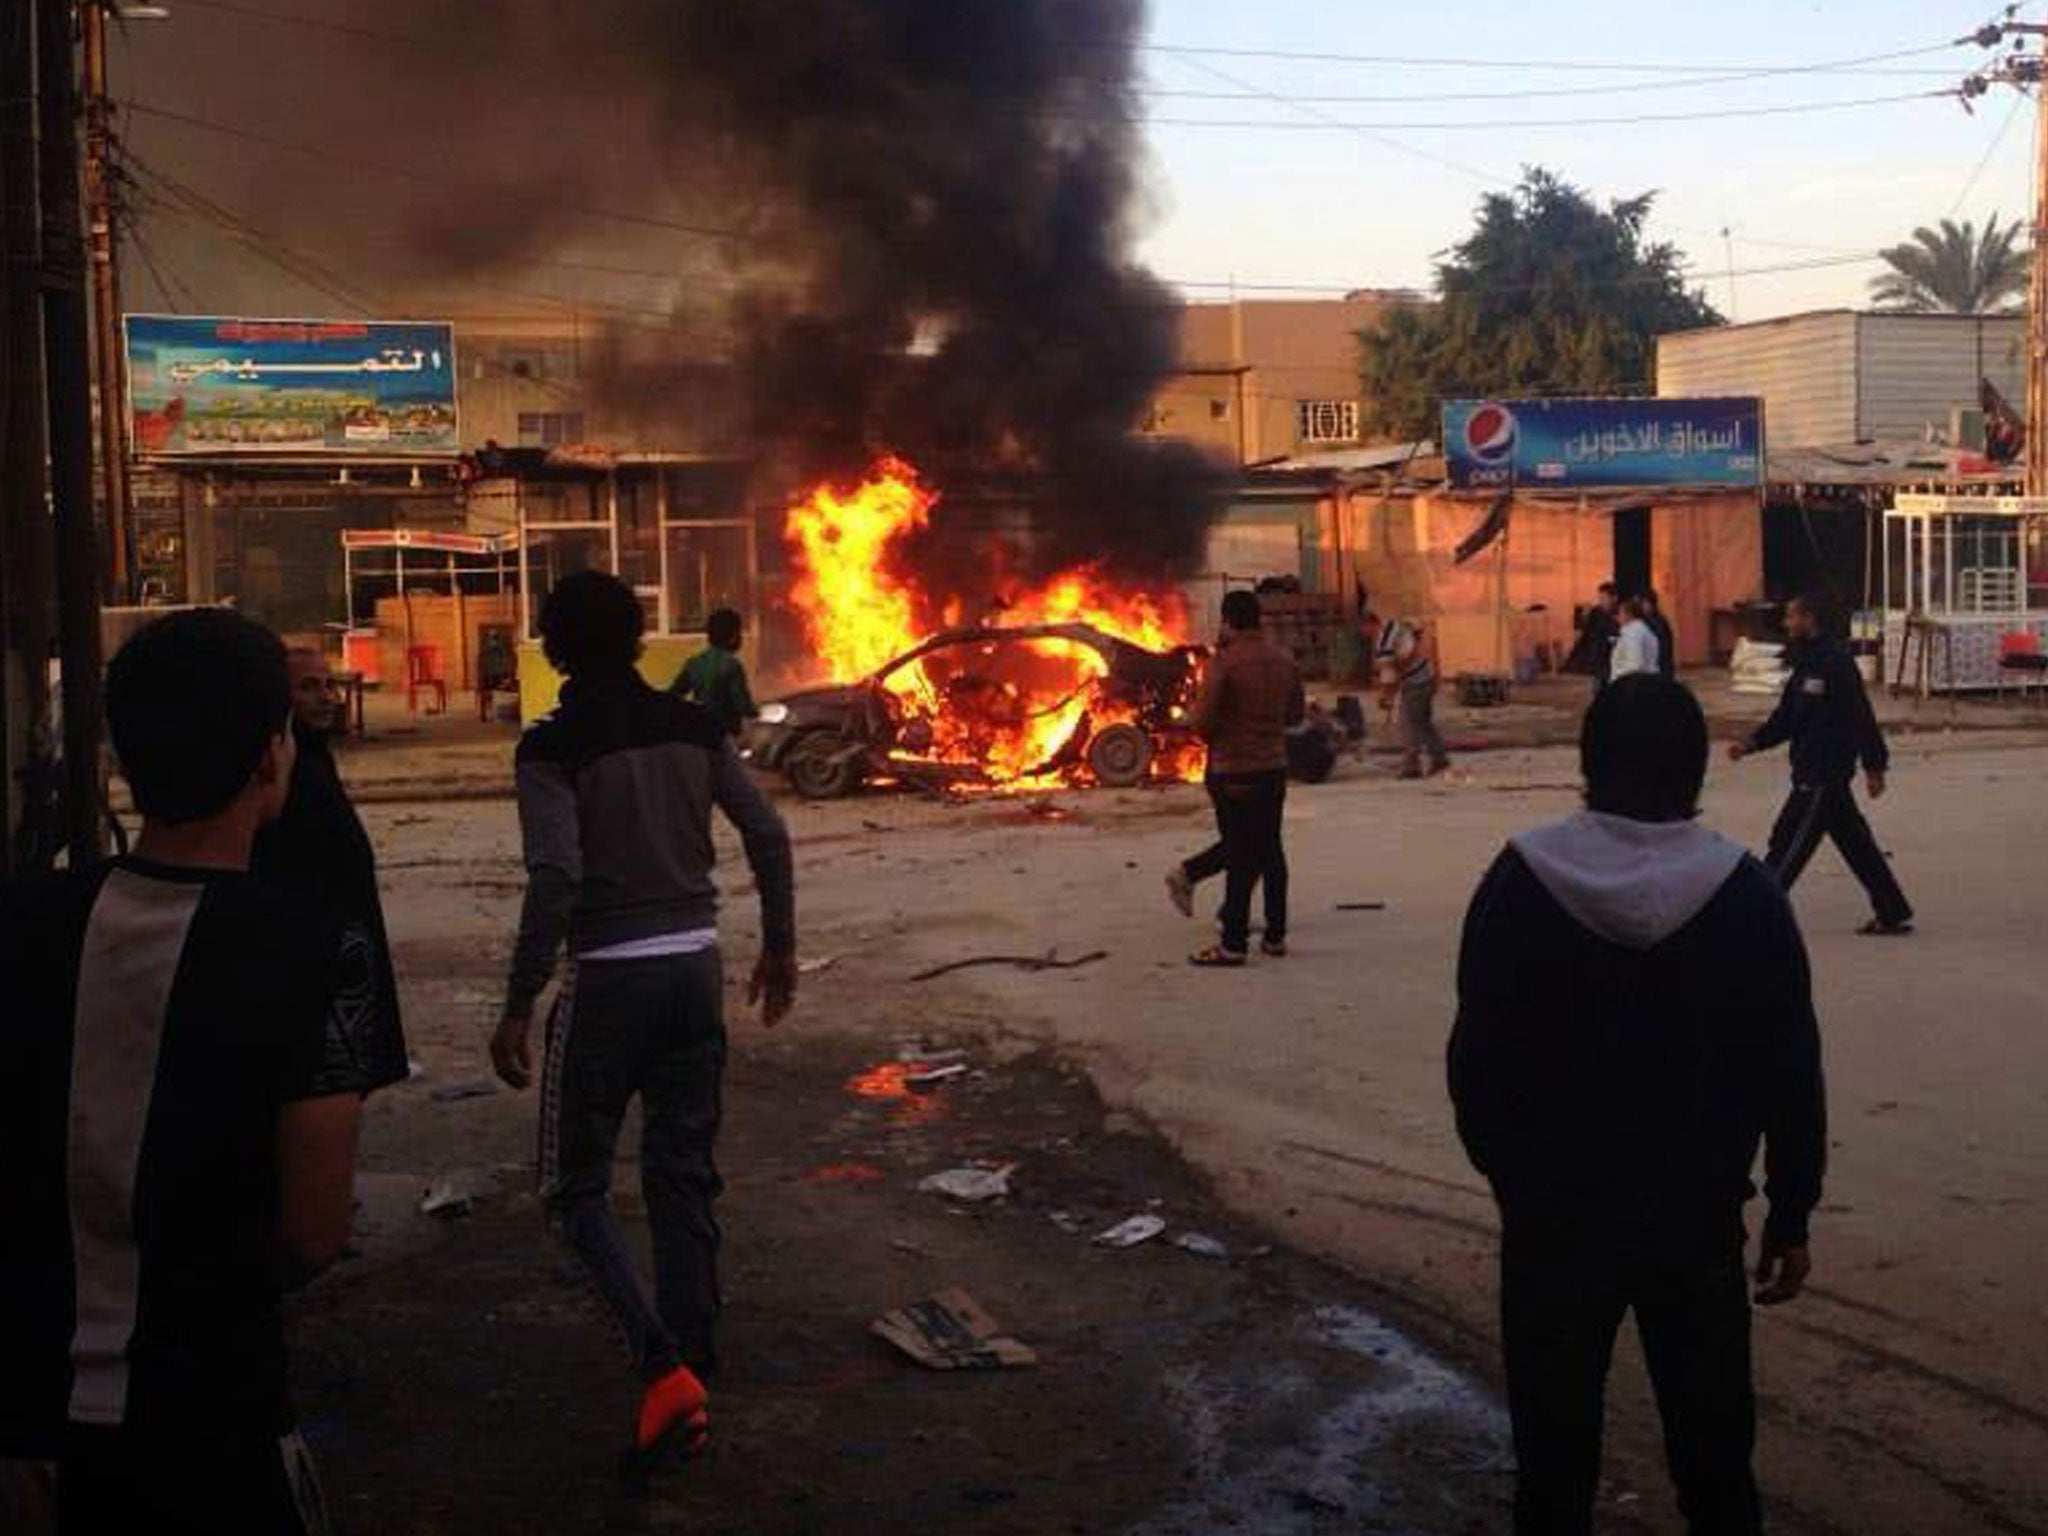 A series of bombings hit Shia areas of Baghdad this month